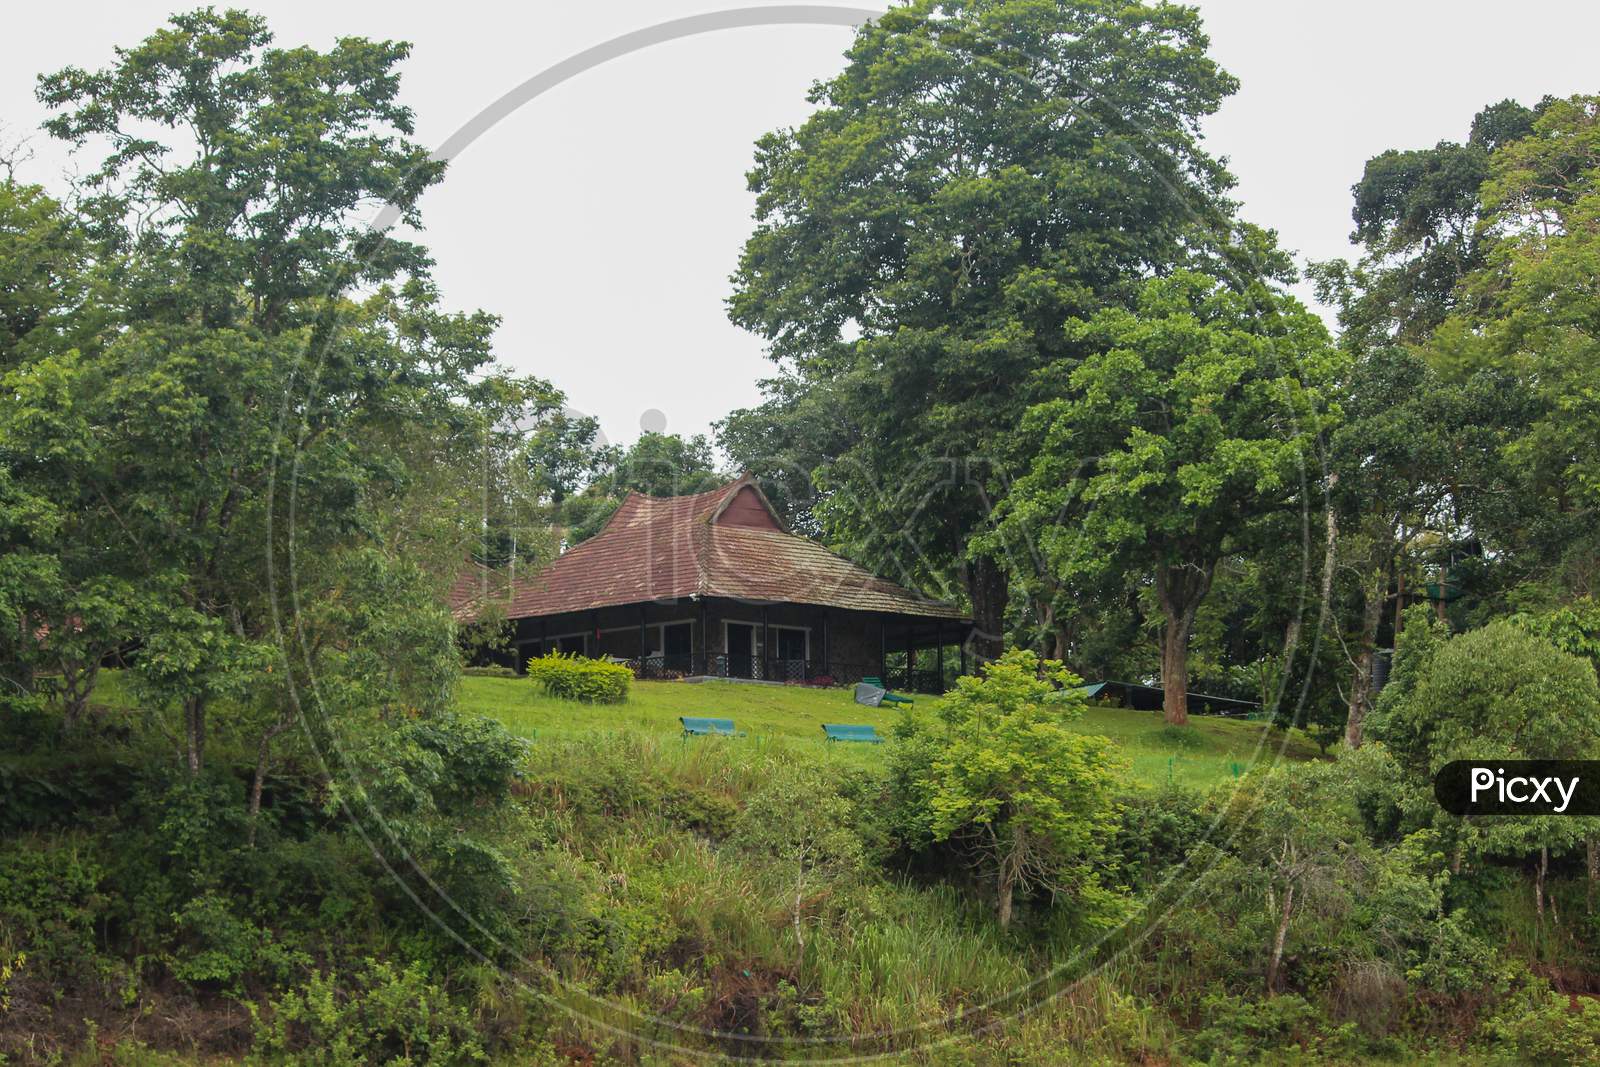 Guest House In Middle Of Periyar Lake In Periyar National Park And Wildlife Sanctuary, Thekkady, Kerala, India